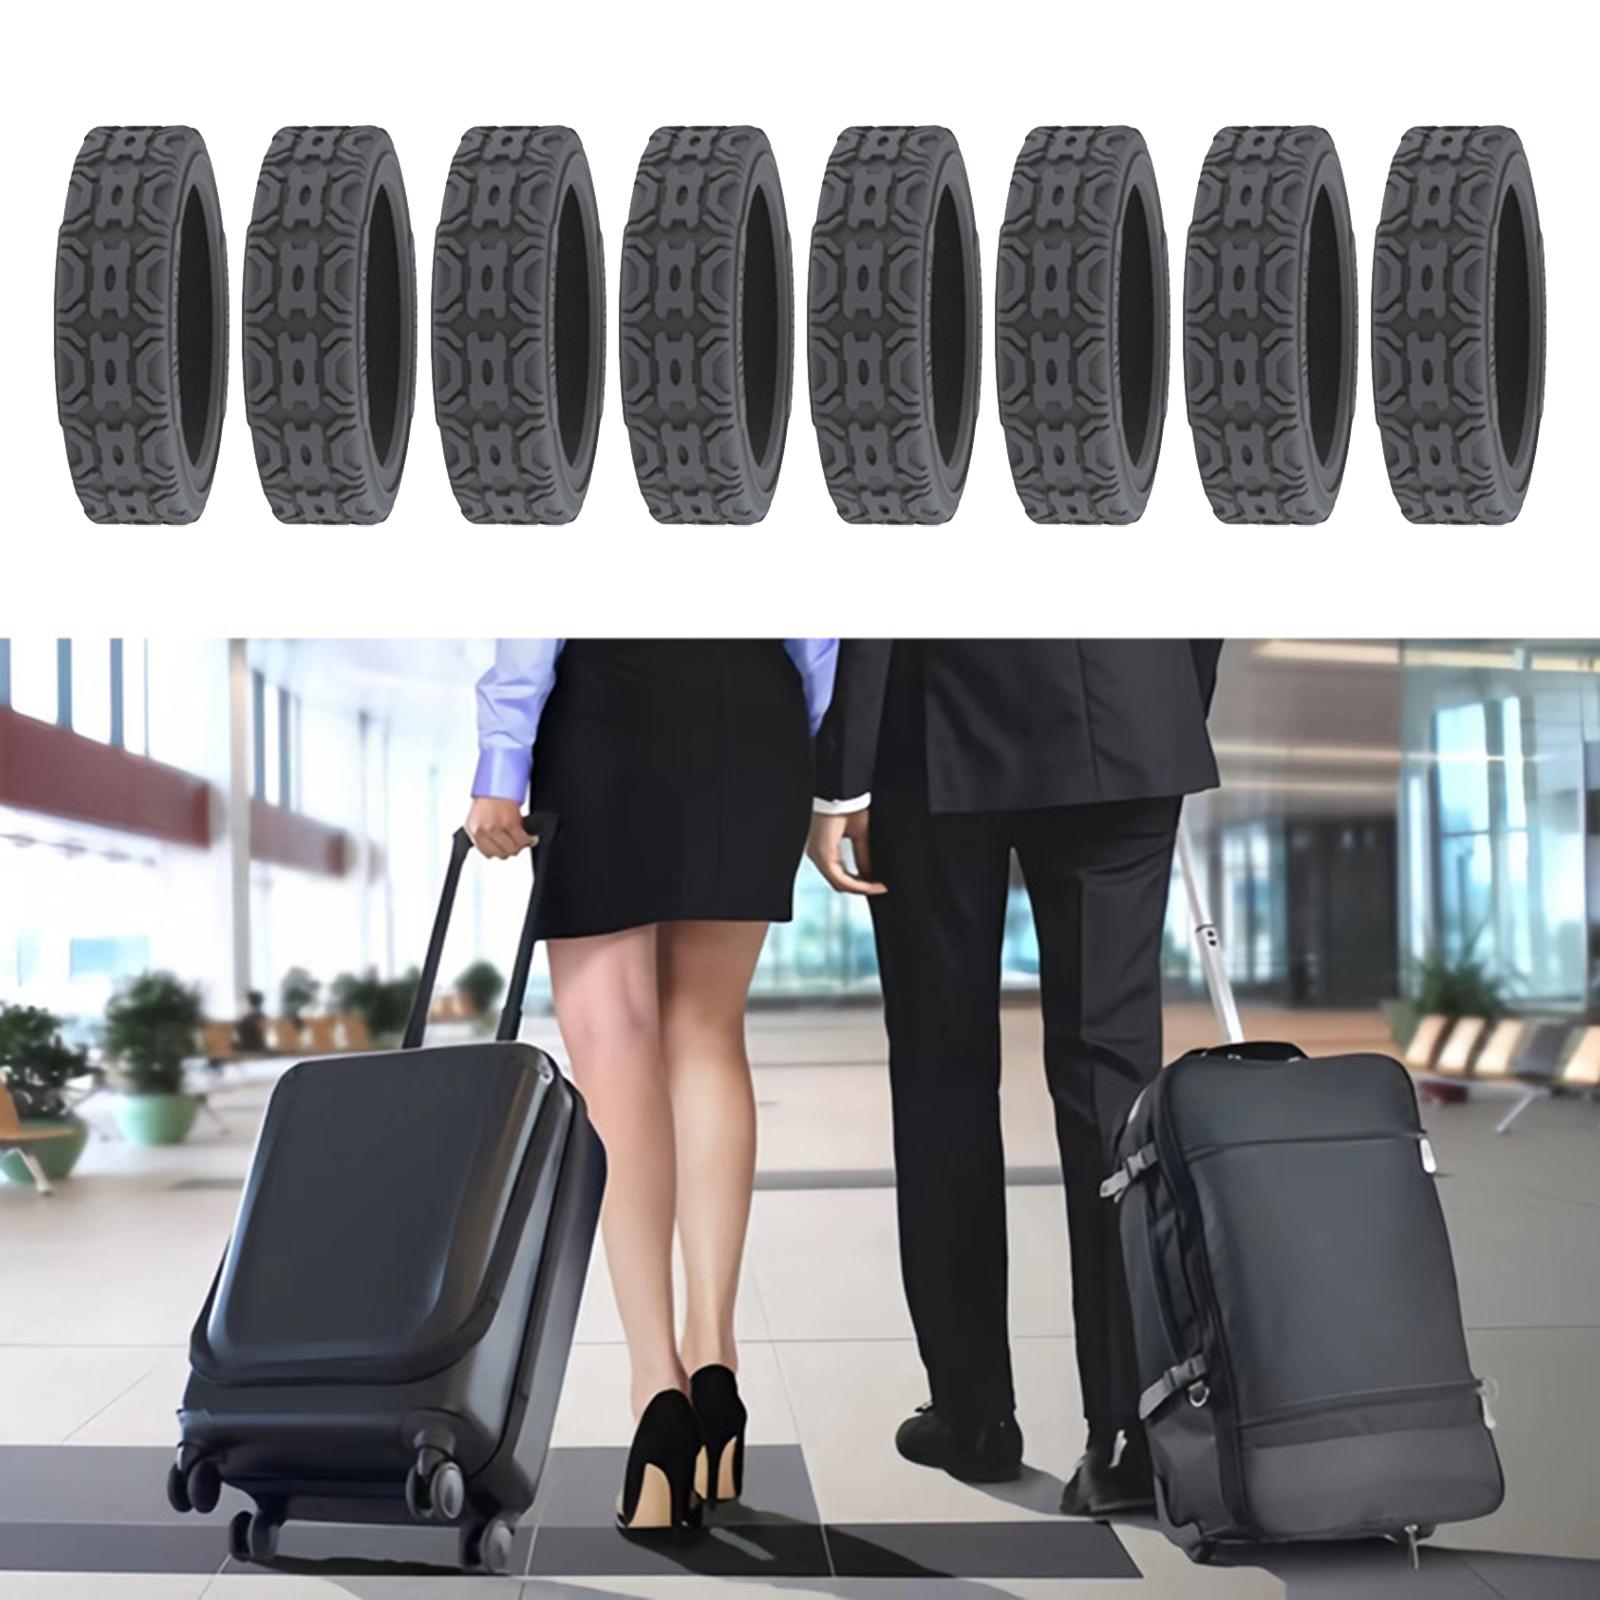 8x Silicone Luggage Wheel Covers Silicone Protective Cover for Most Suitcase light grey